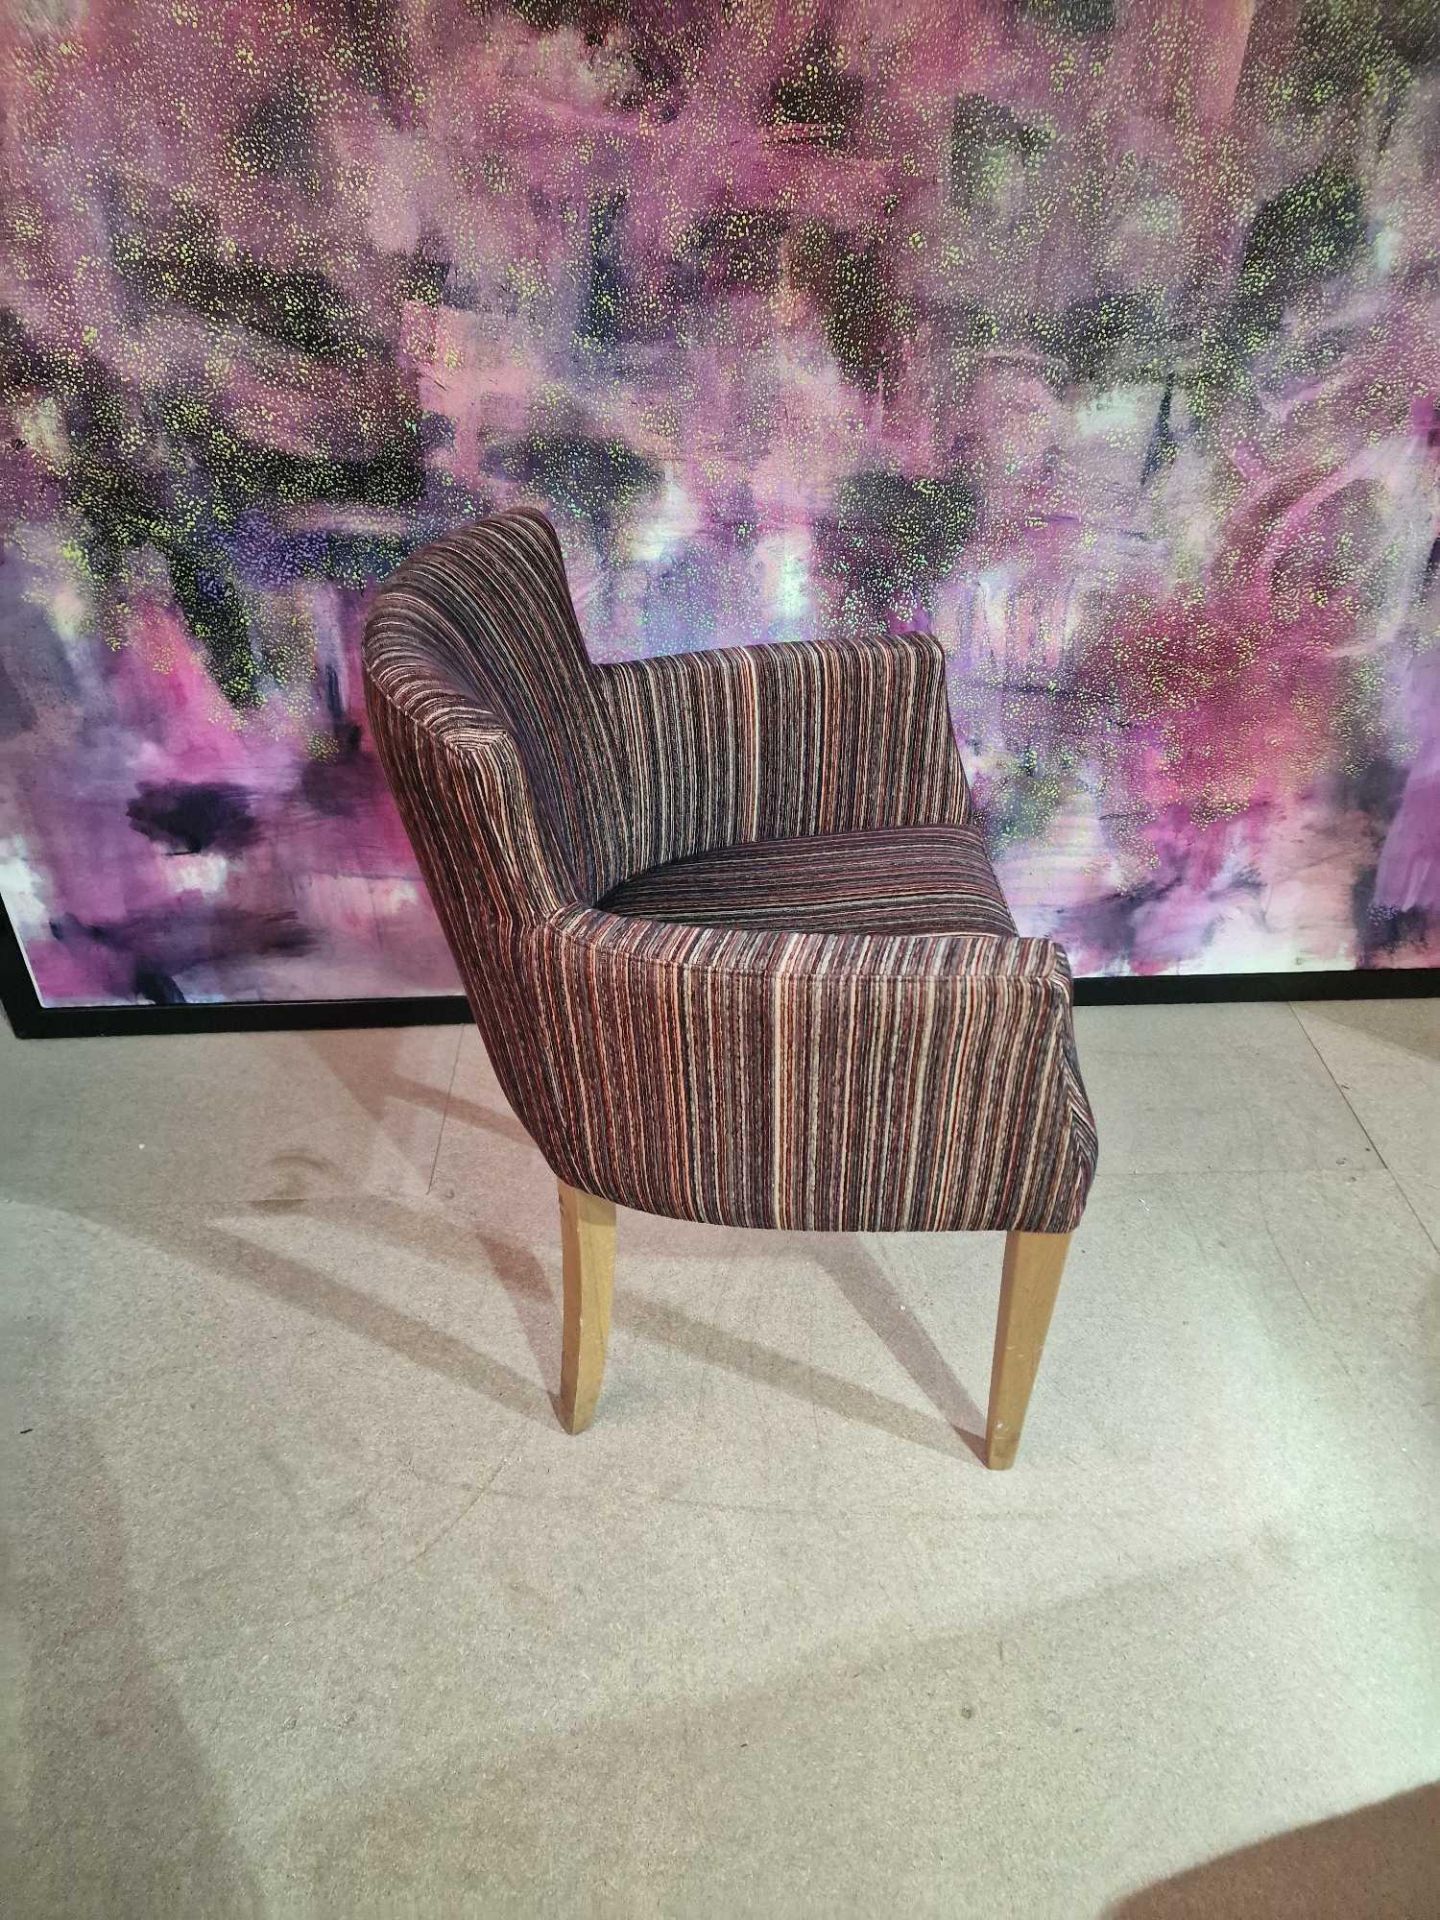 Contemporary dining chair Upholstered in a modern striped pattern fabric, the high arm rests and - Bild 4 aus 4